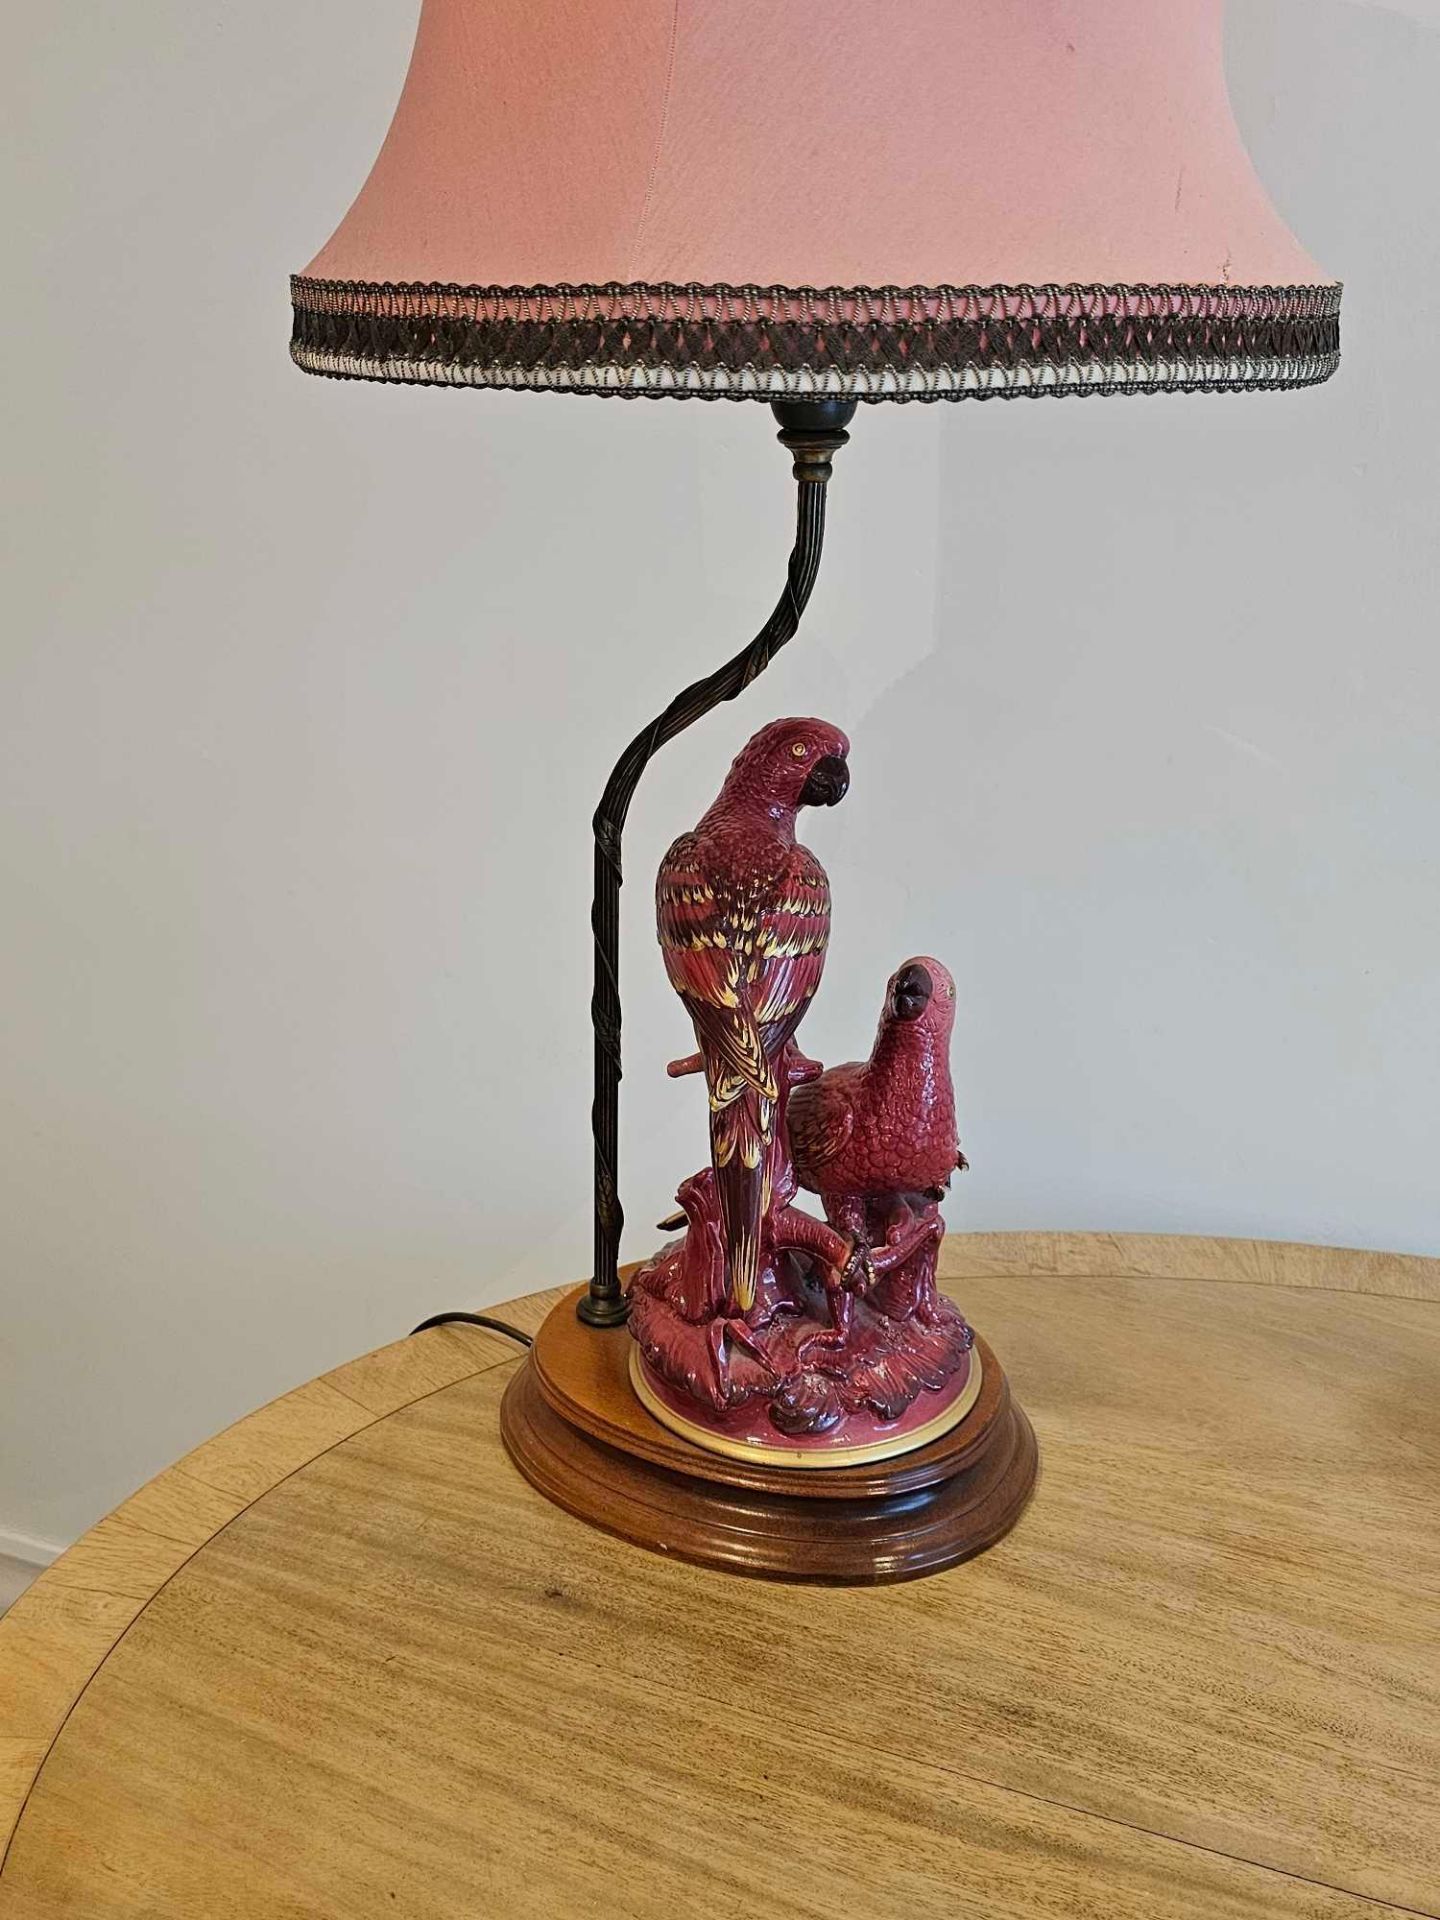 A Vintage Table Lamp Decorated With A Pair Of Painted Ceramic Parrots Sitting Upon A Wooden Base - Image 3 of 3